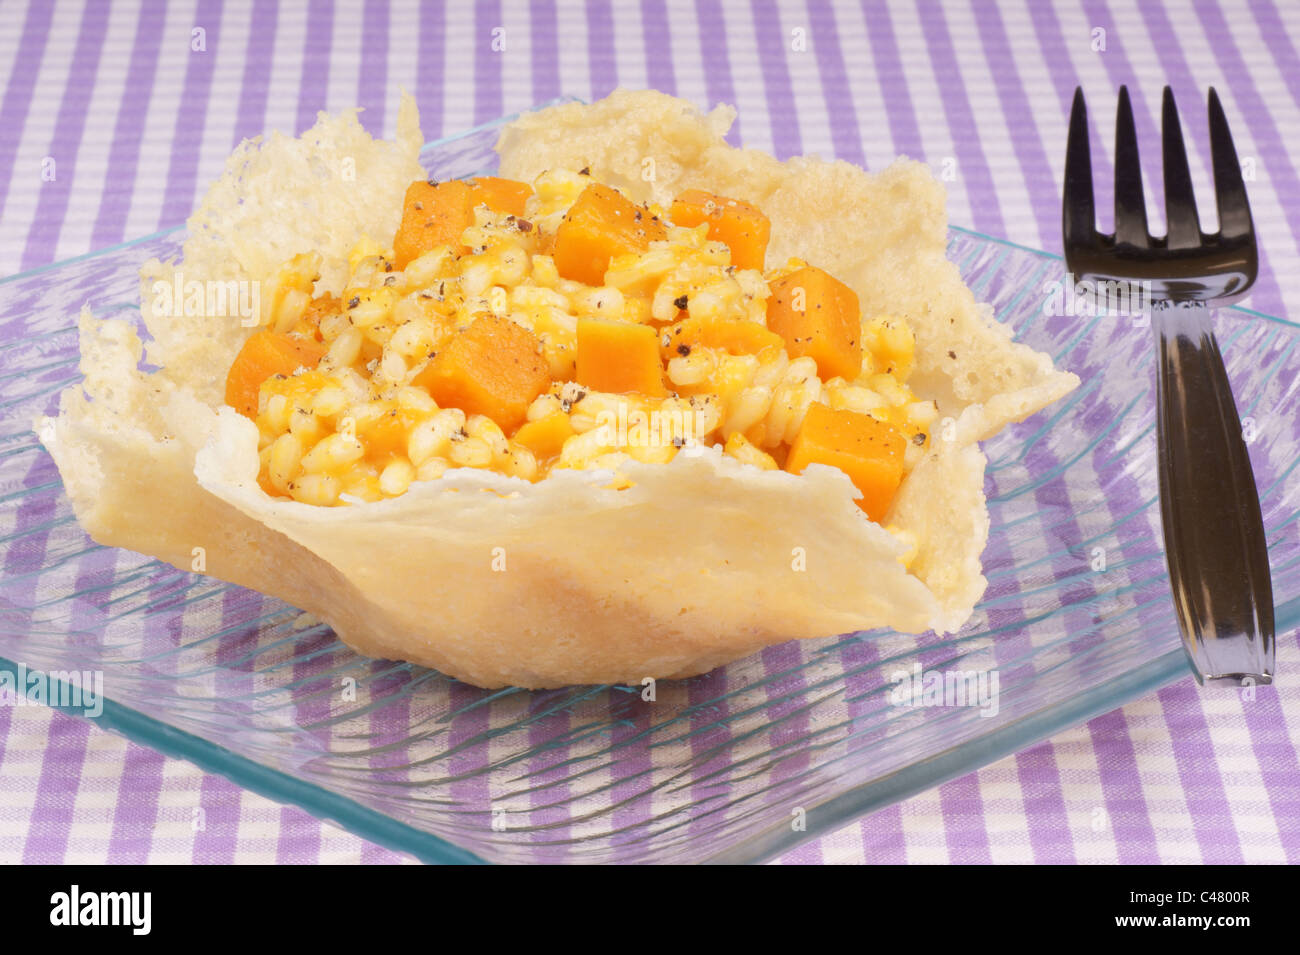 Cheese basket filled with risotto and pumpkin over a glass dish Stock Photo